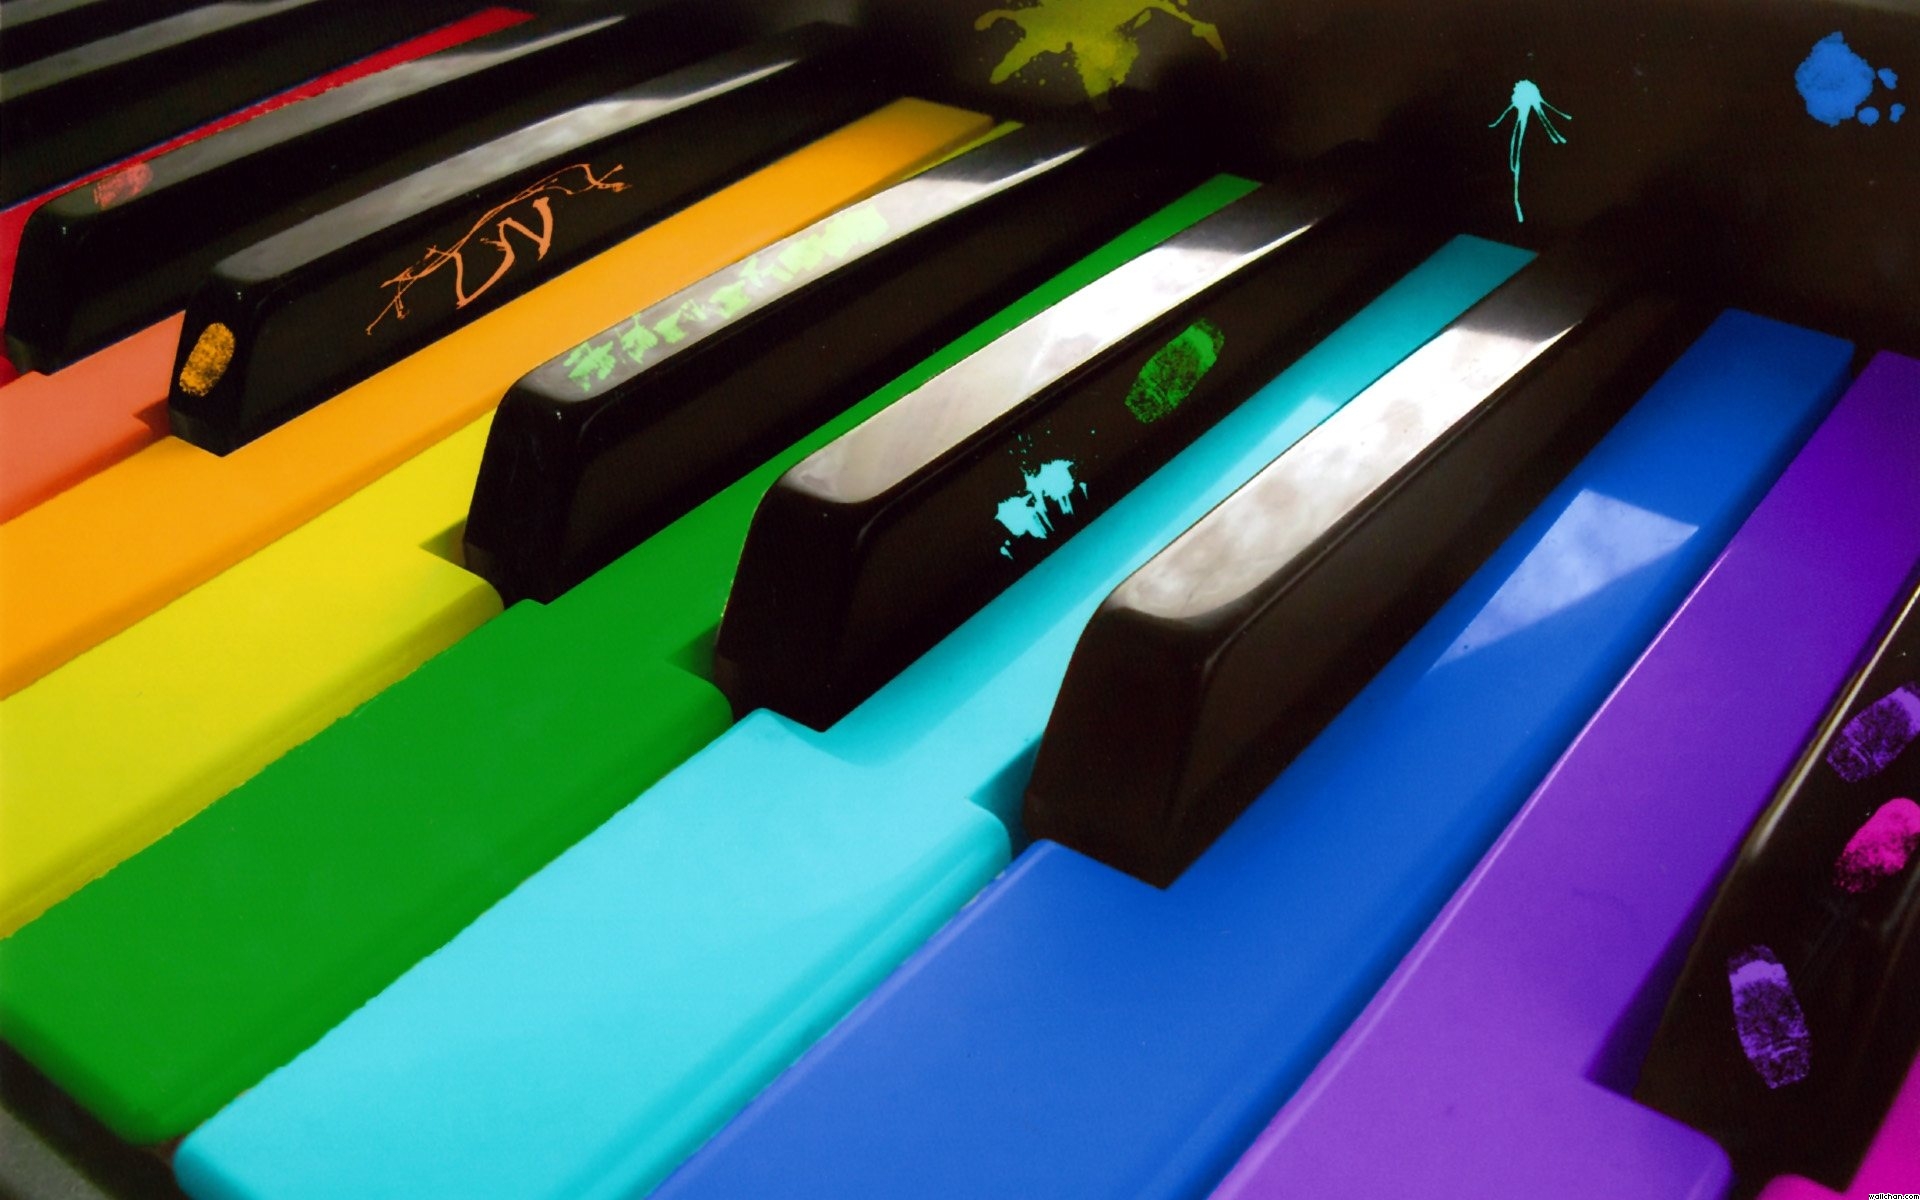 awesome piano wallpapers